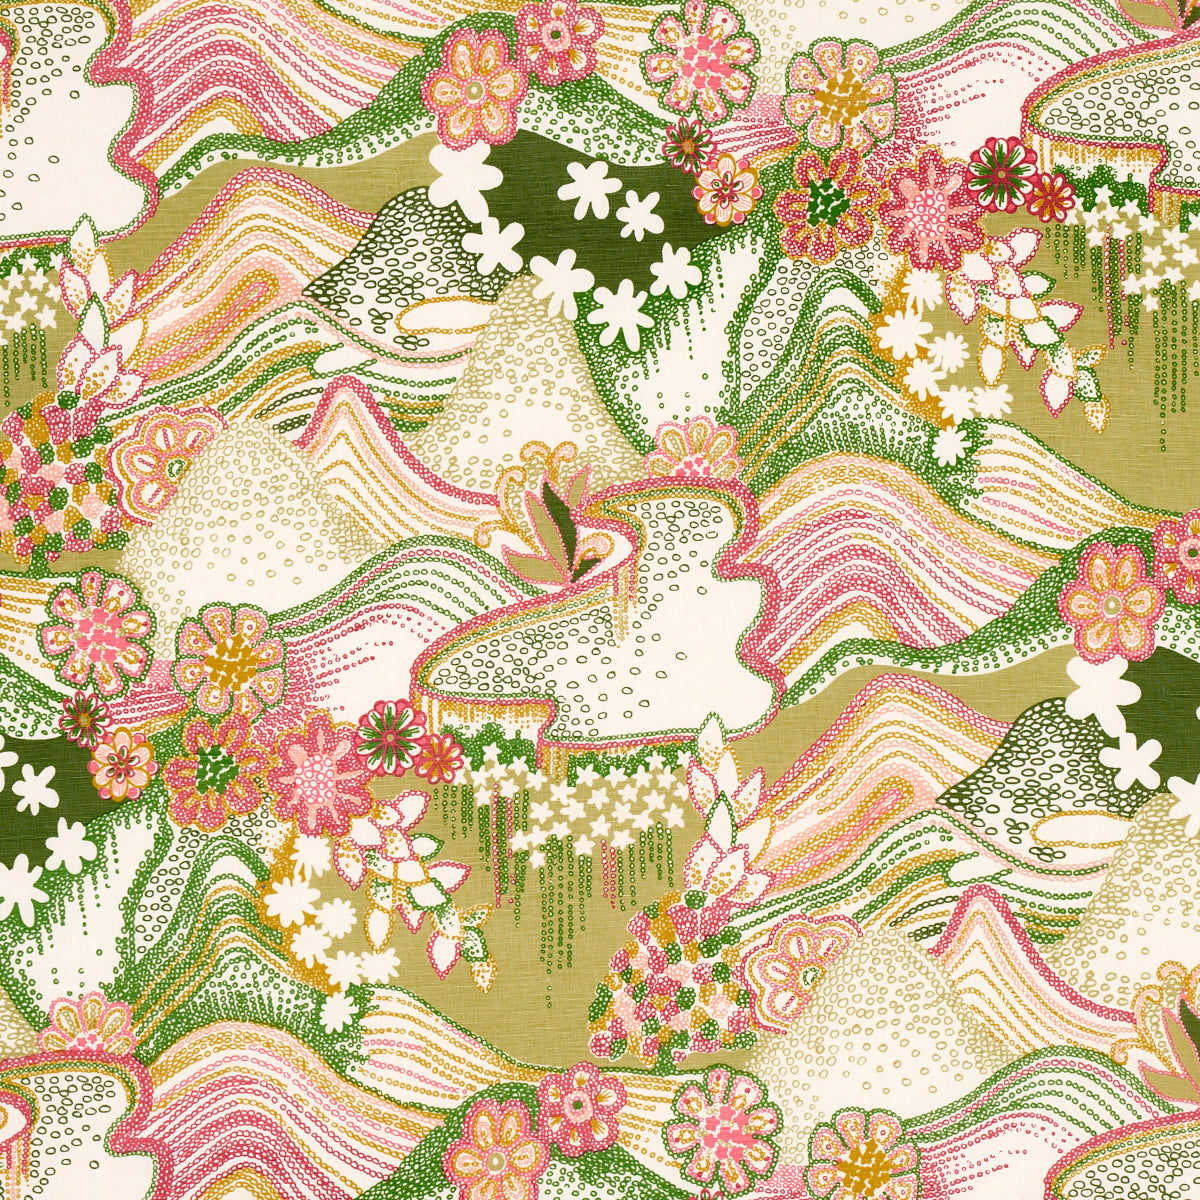 Daisy Chain Fabric Sample - Green And Pink